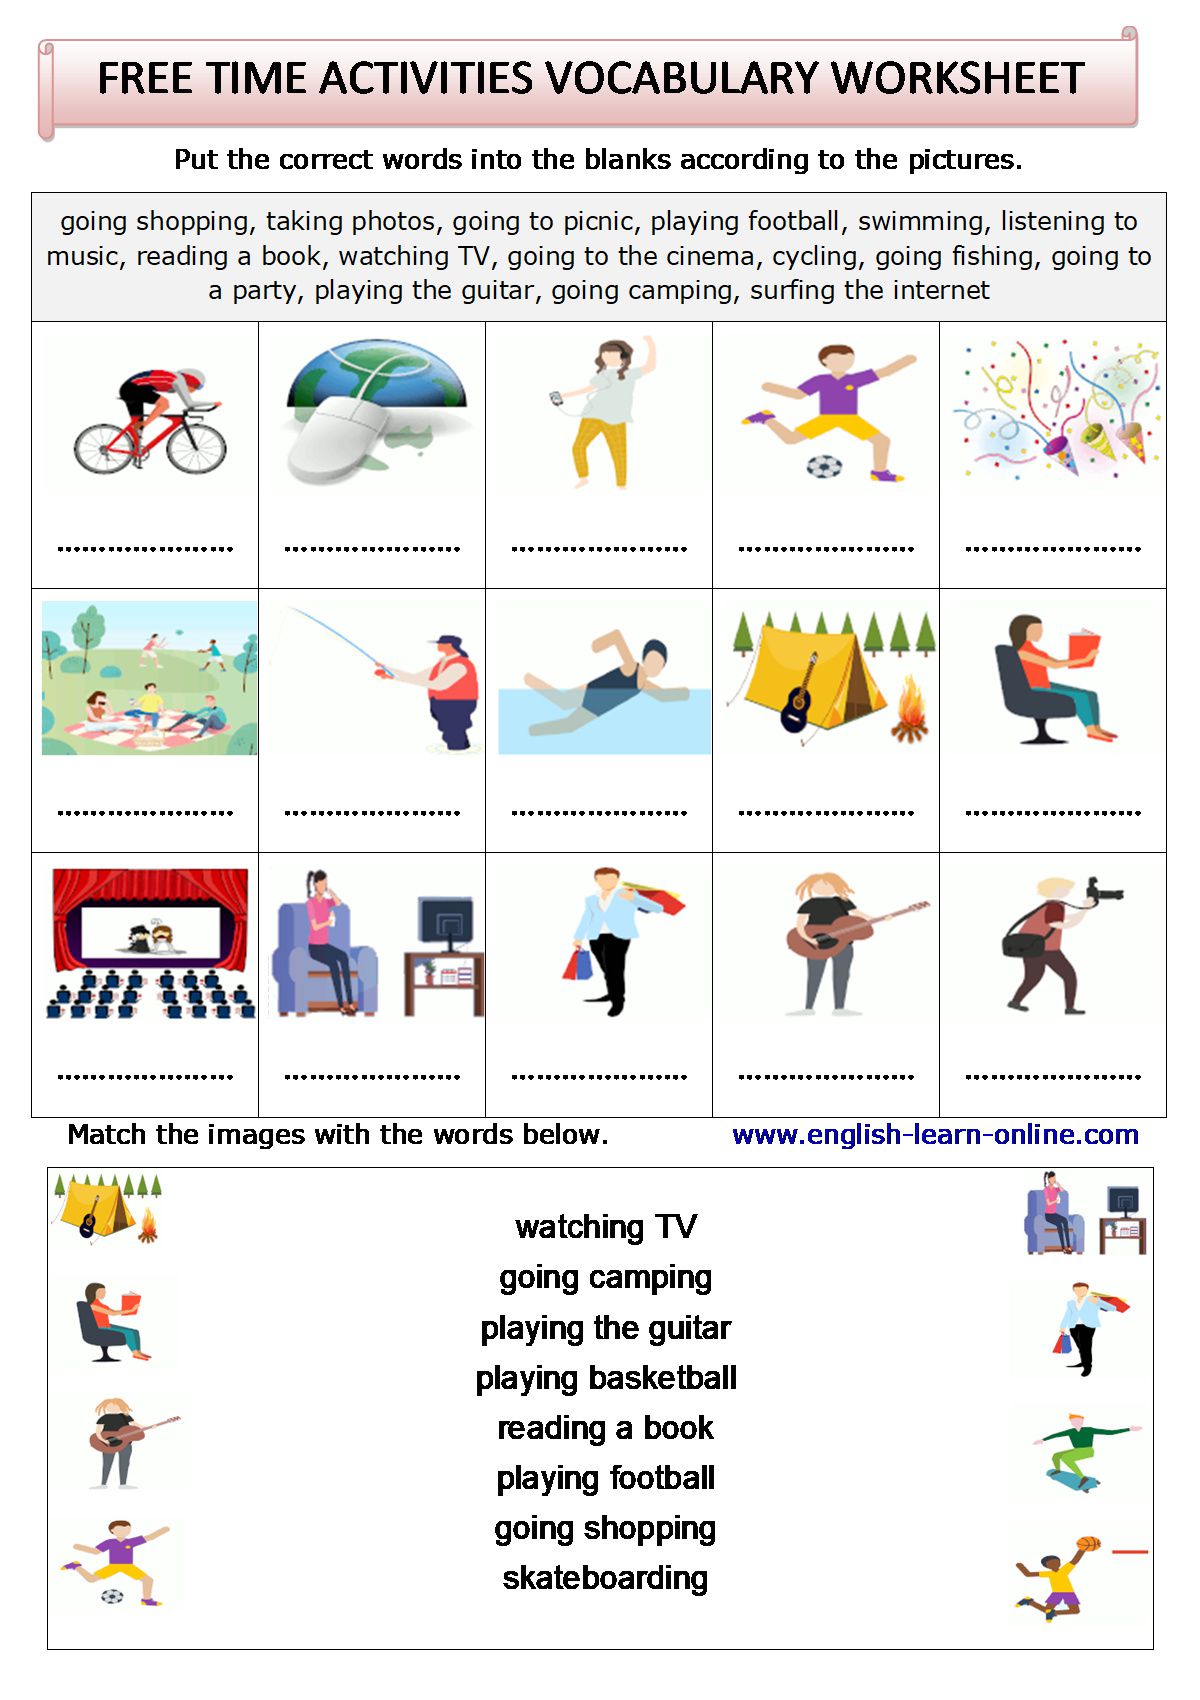 HOMENGLISH Sport & Free Time - Language Learning Games